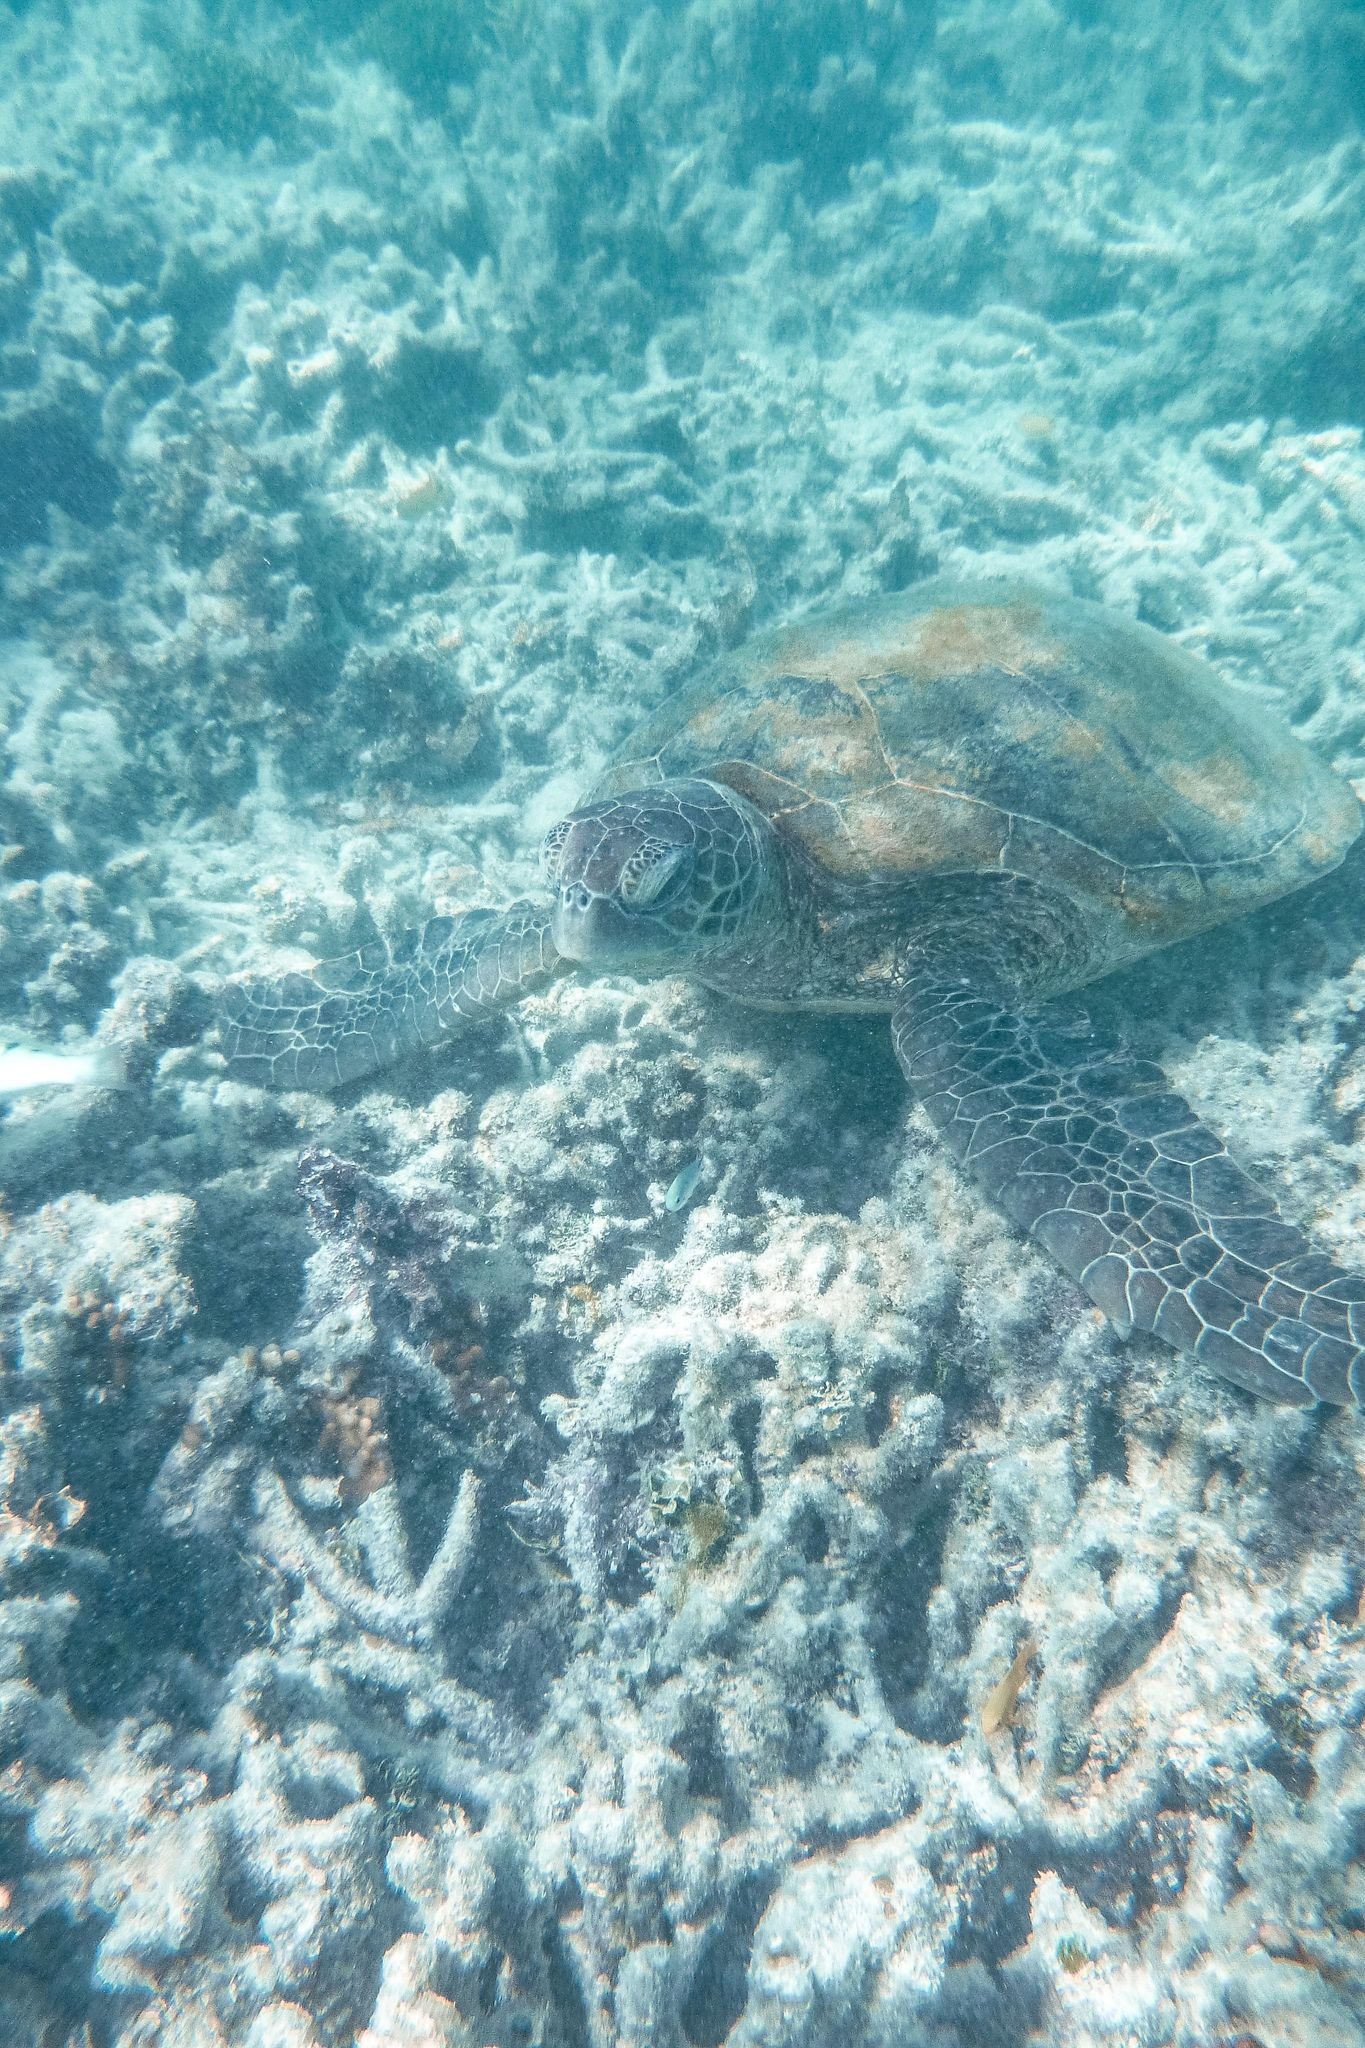 Swimming and snorkelling with a Green Sea Turtle on the Great Barrier Reef in Queensland #swimmingwithturtles #heronisland #greatbarrierreef